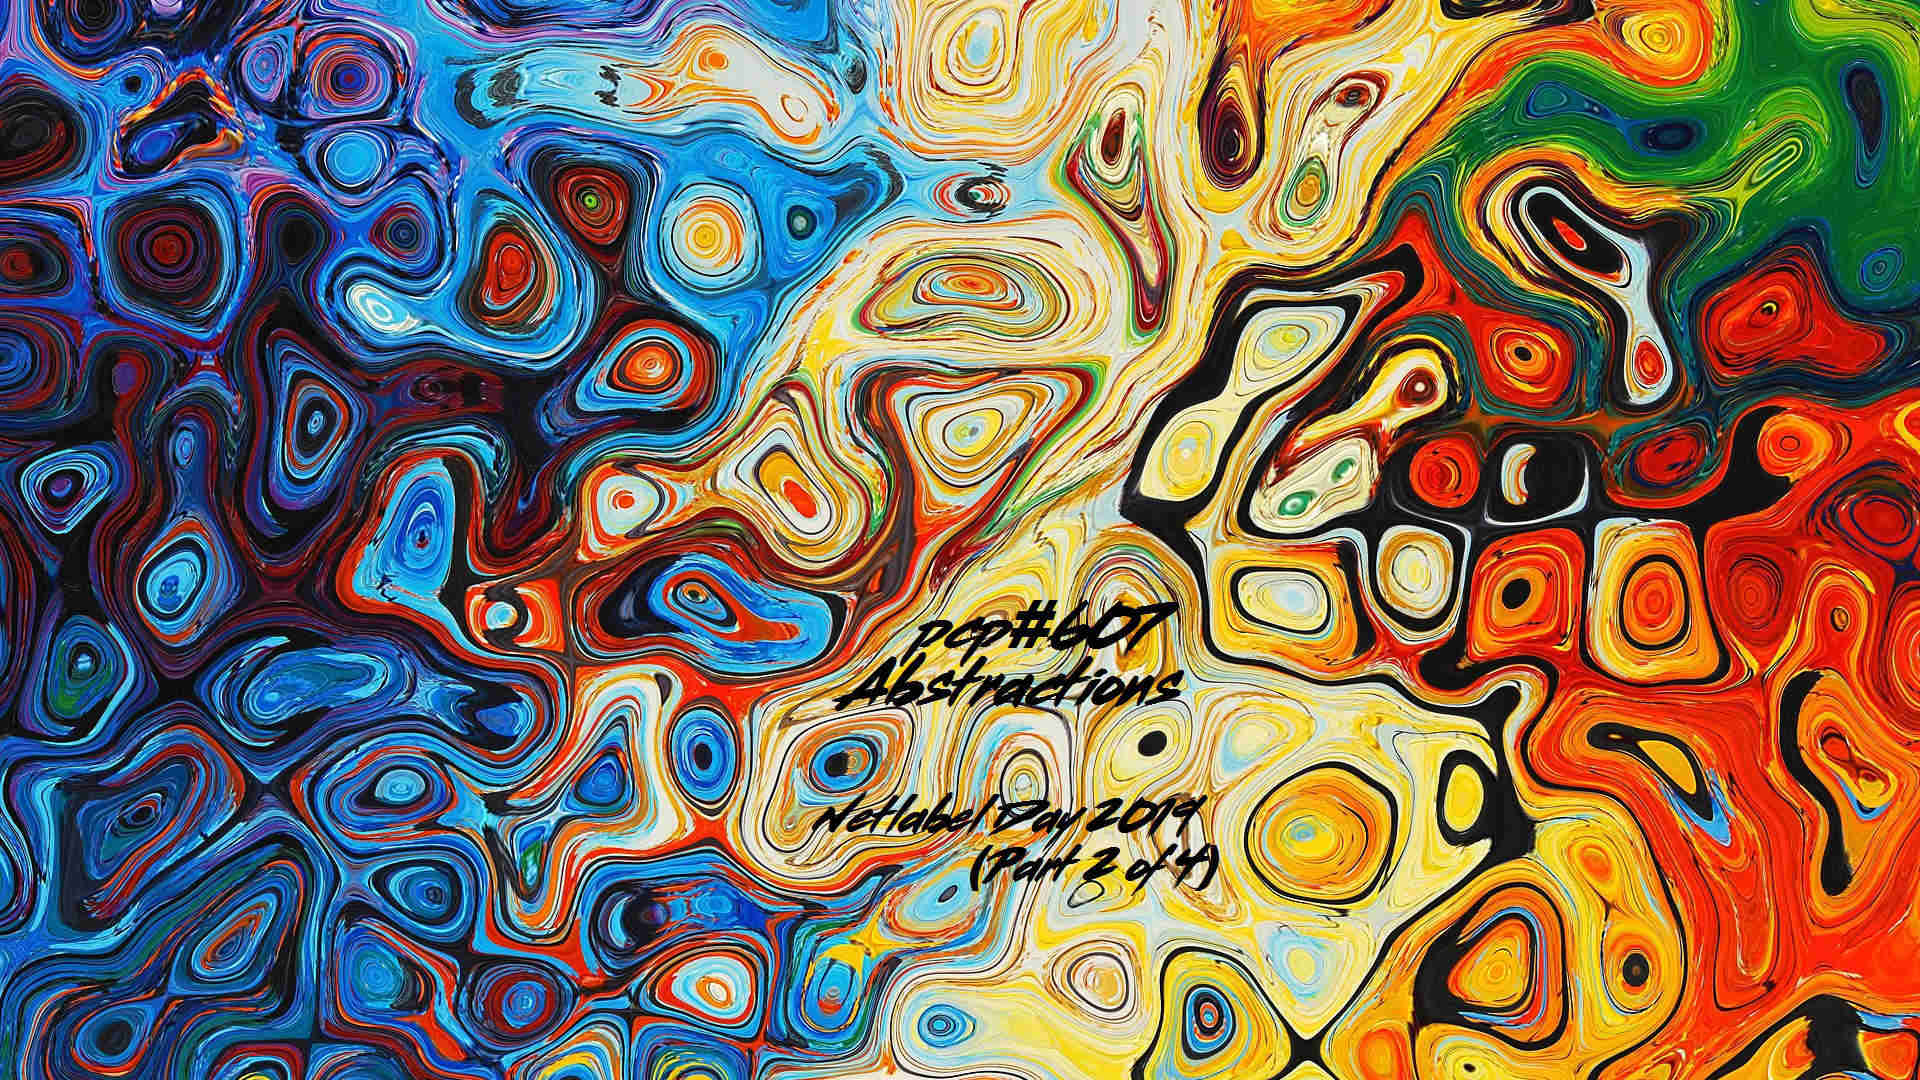 PCP#607... Abstractions... Netlabel Day 2019 (Part 2 of 4)...